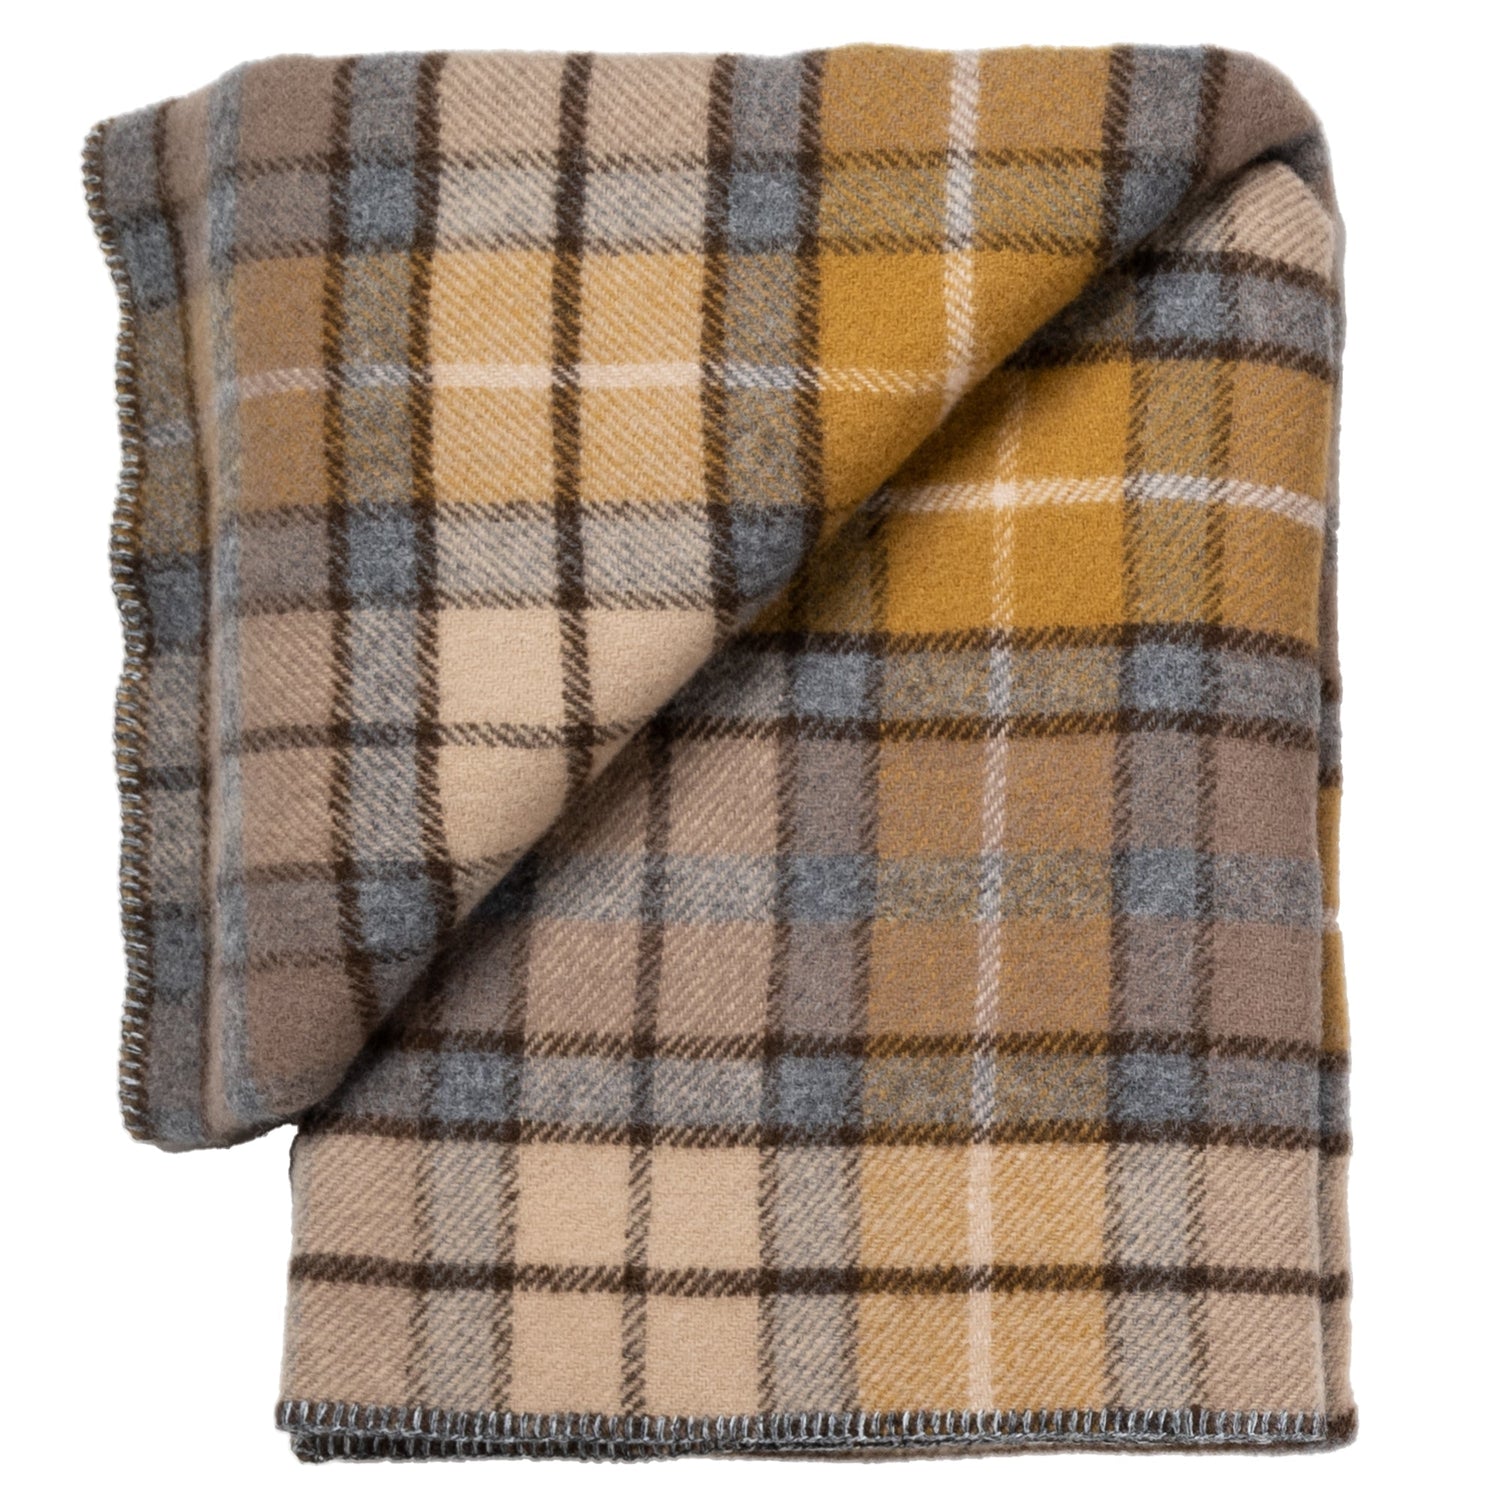 Prince of Scots Highland Tweeds BIG Throw ~Natural Buchanan ~-Throws and Blankets-810032753016-BIGThrowNaturalBuch-Prince of Scots